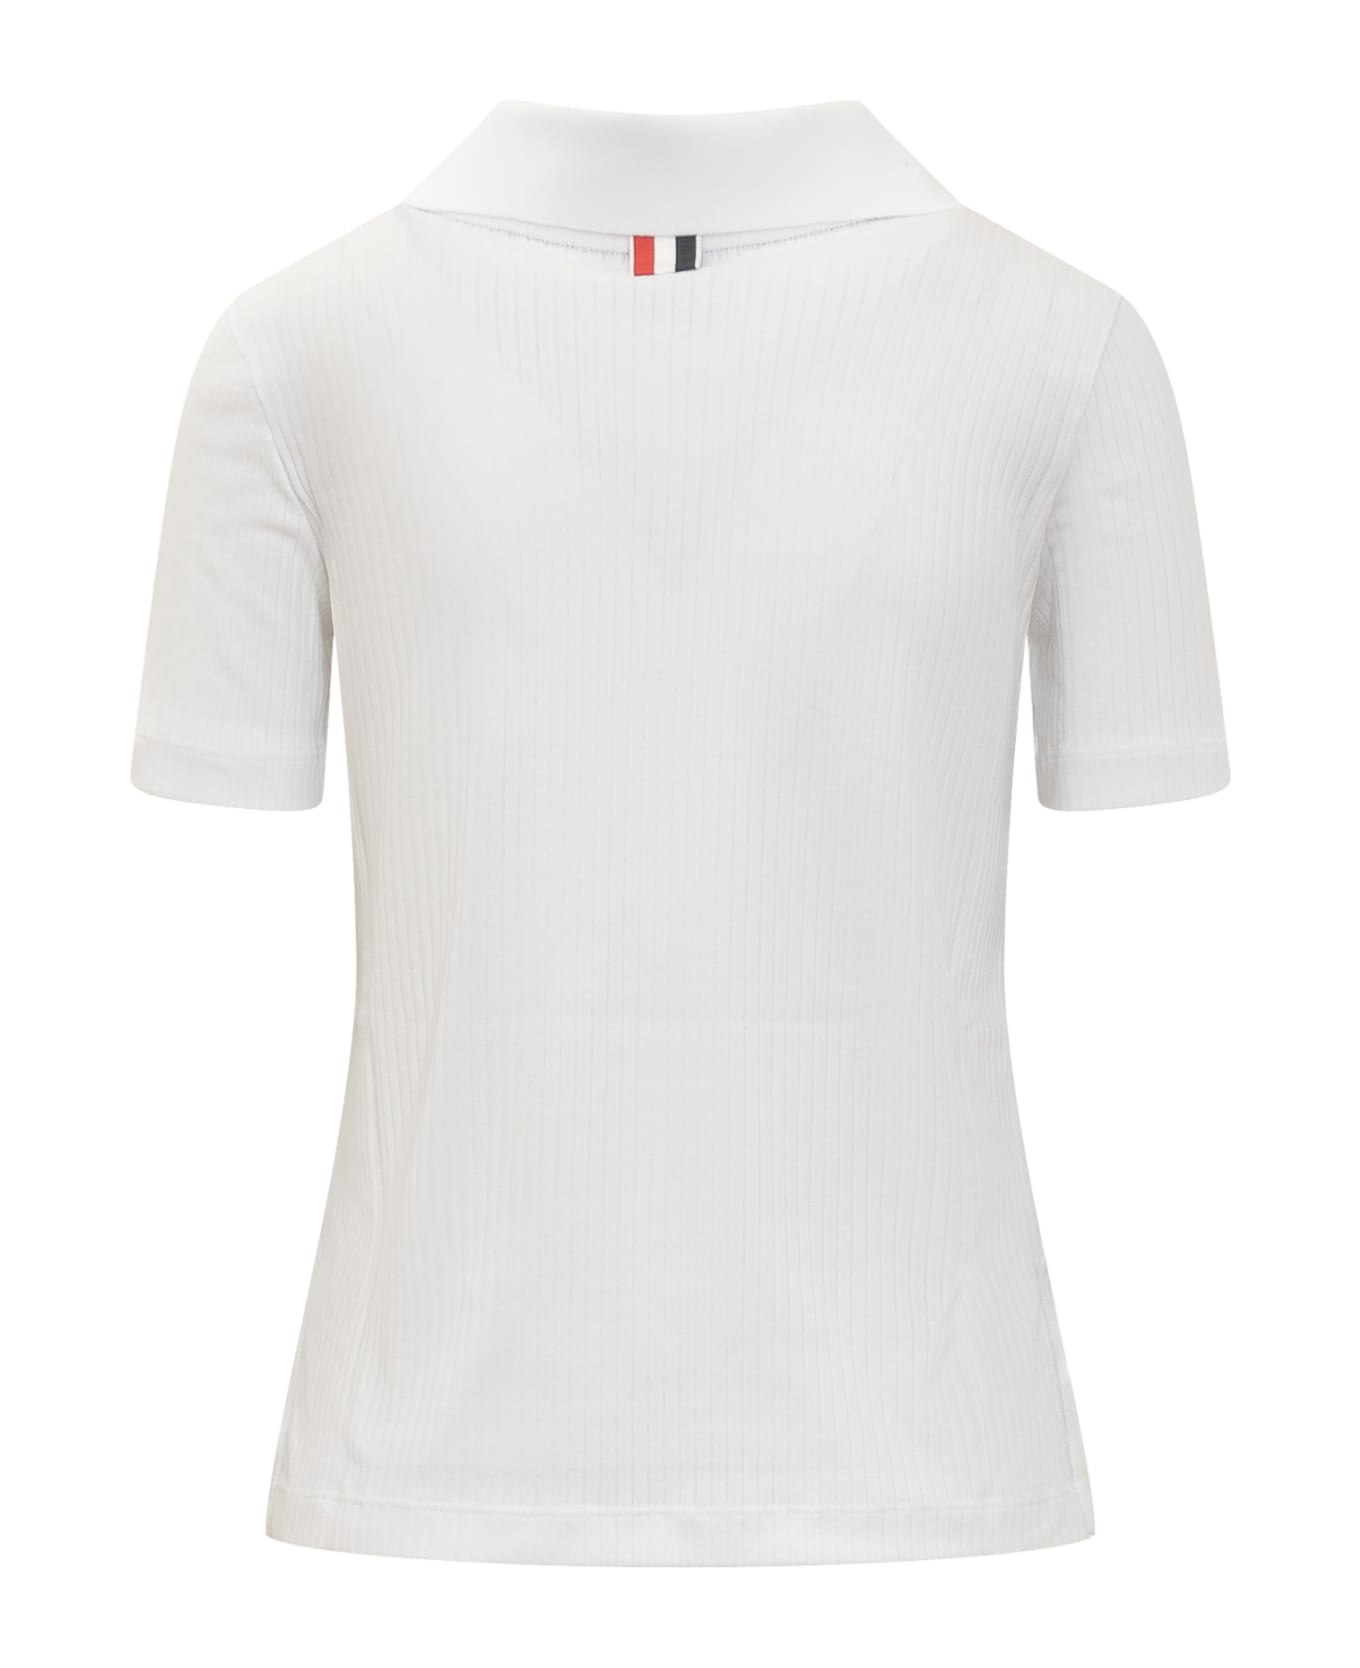 Thom Browne S/s Polo With Web Stripes - White